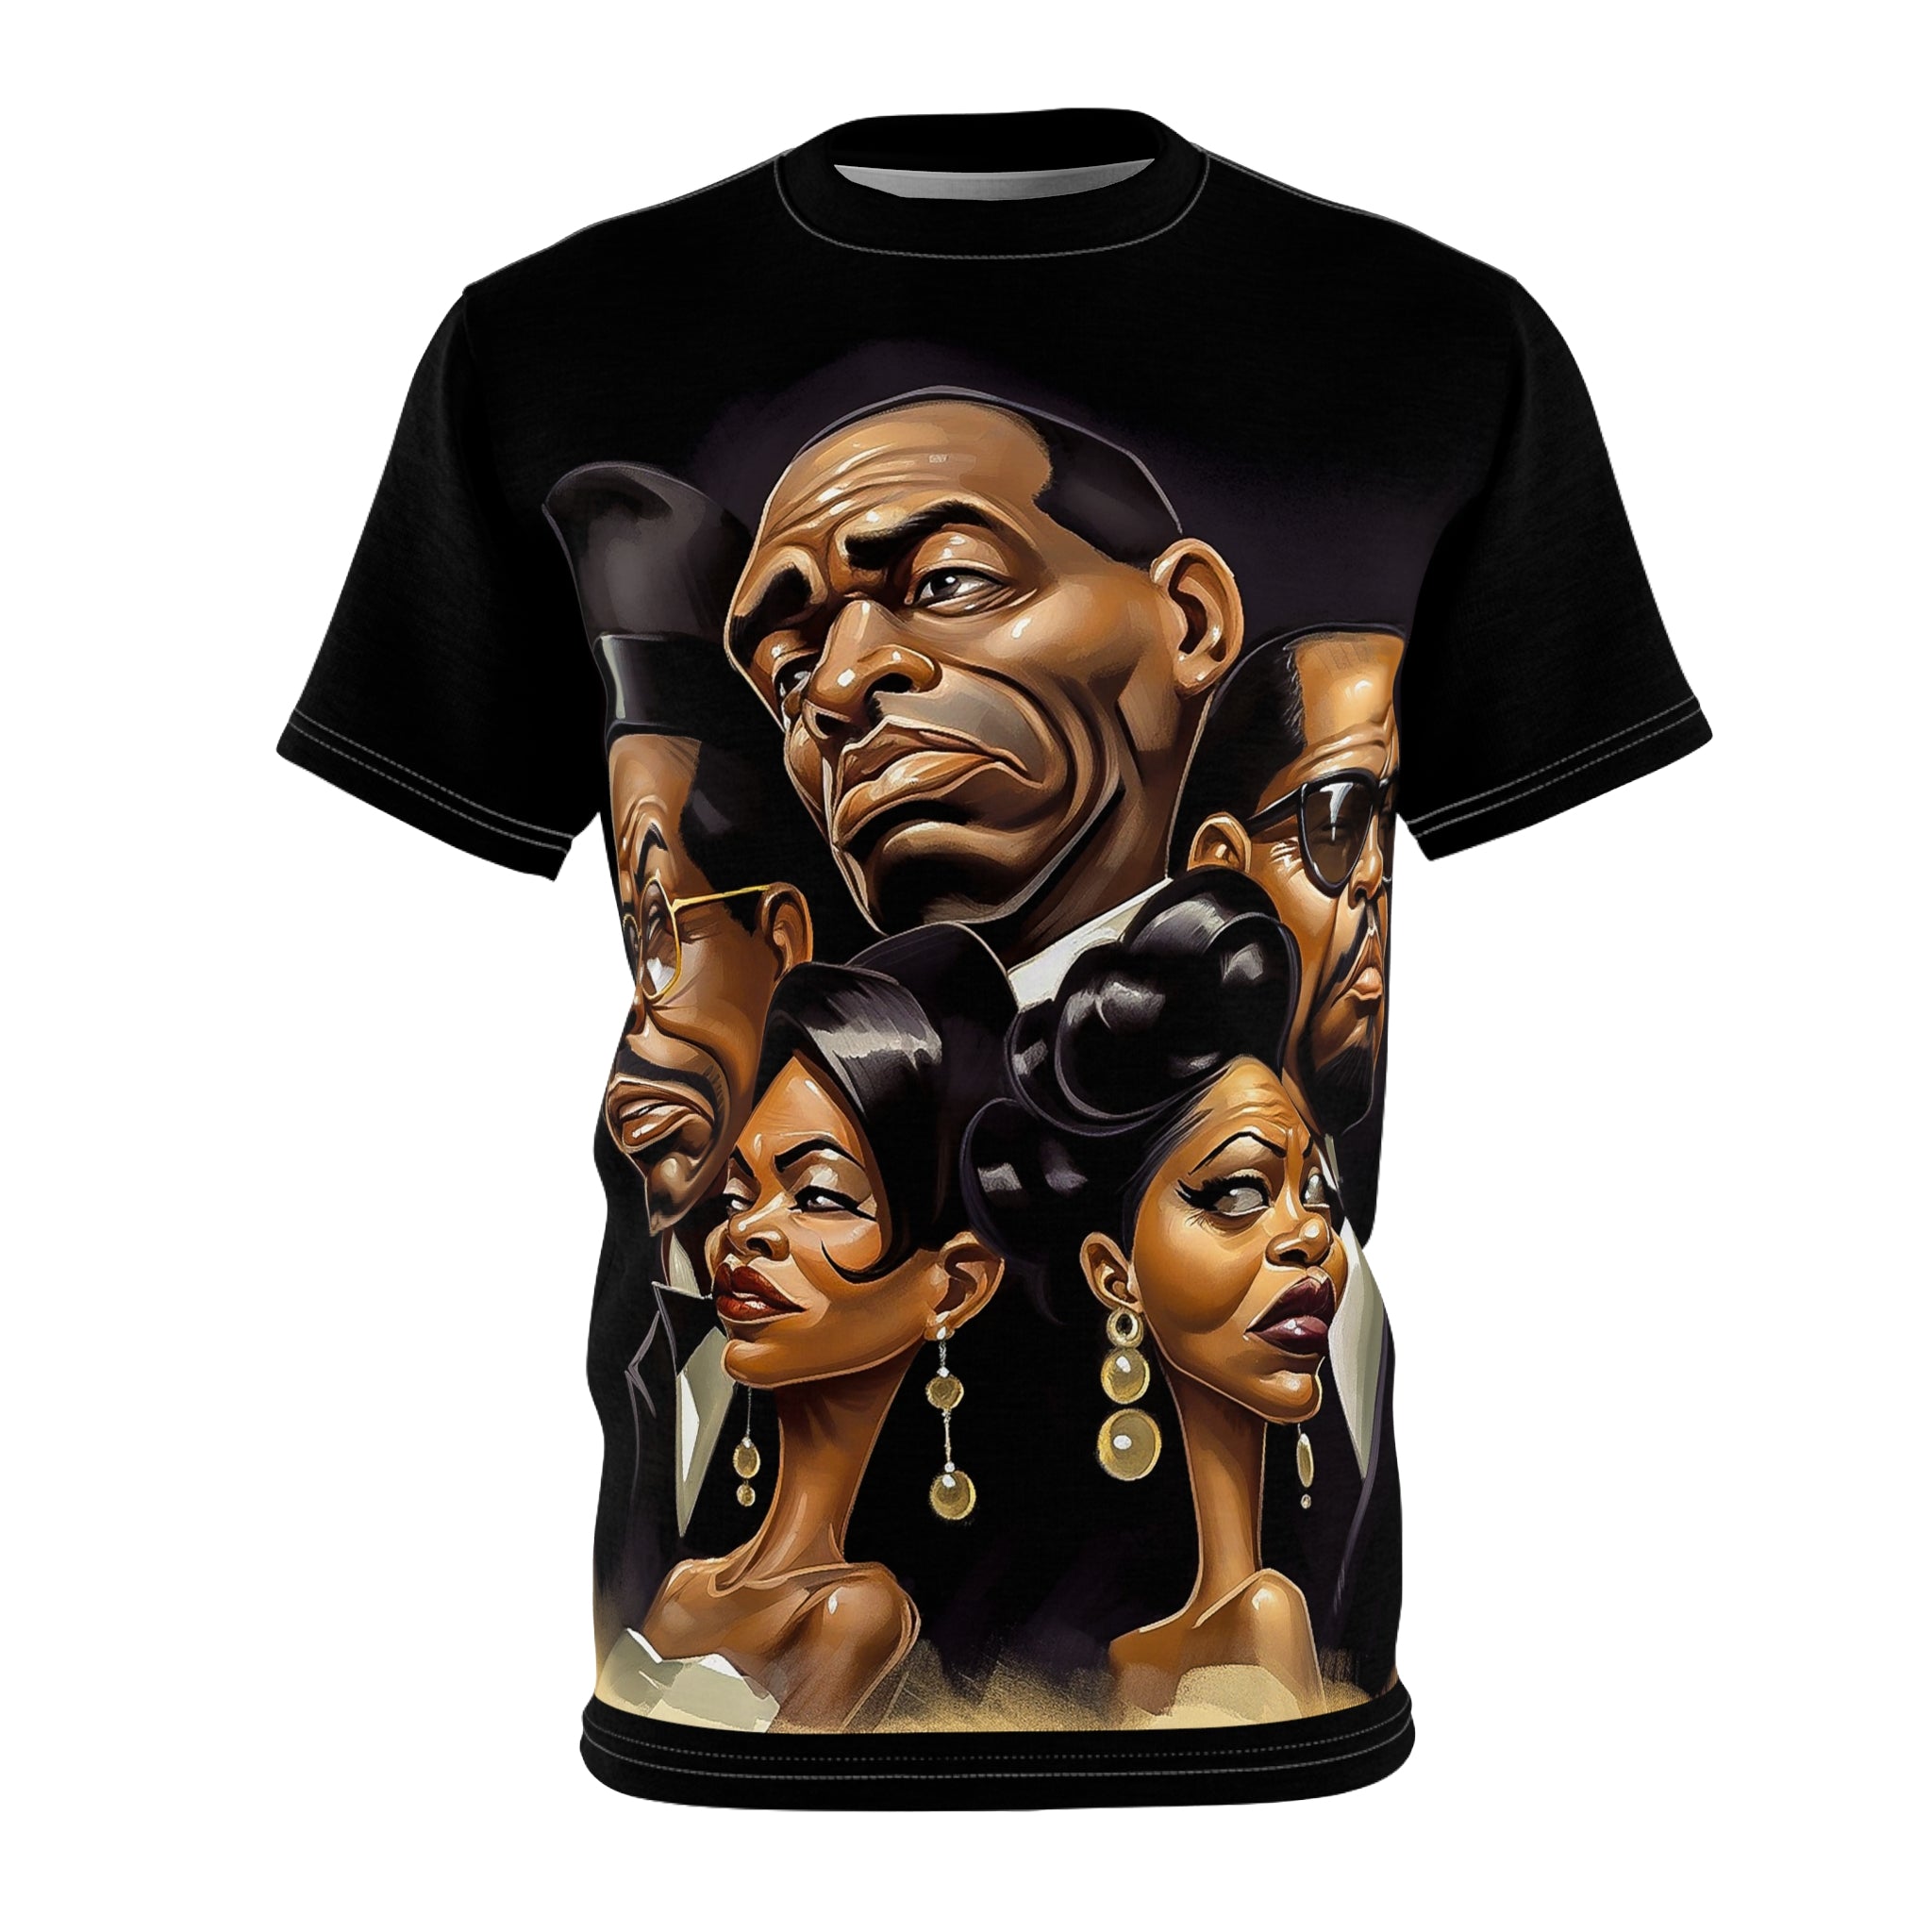 "JUS BOUGIE II" - African American Themed Unisex T-shirt